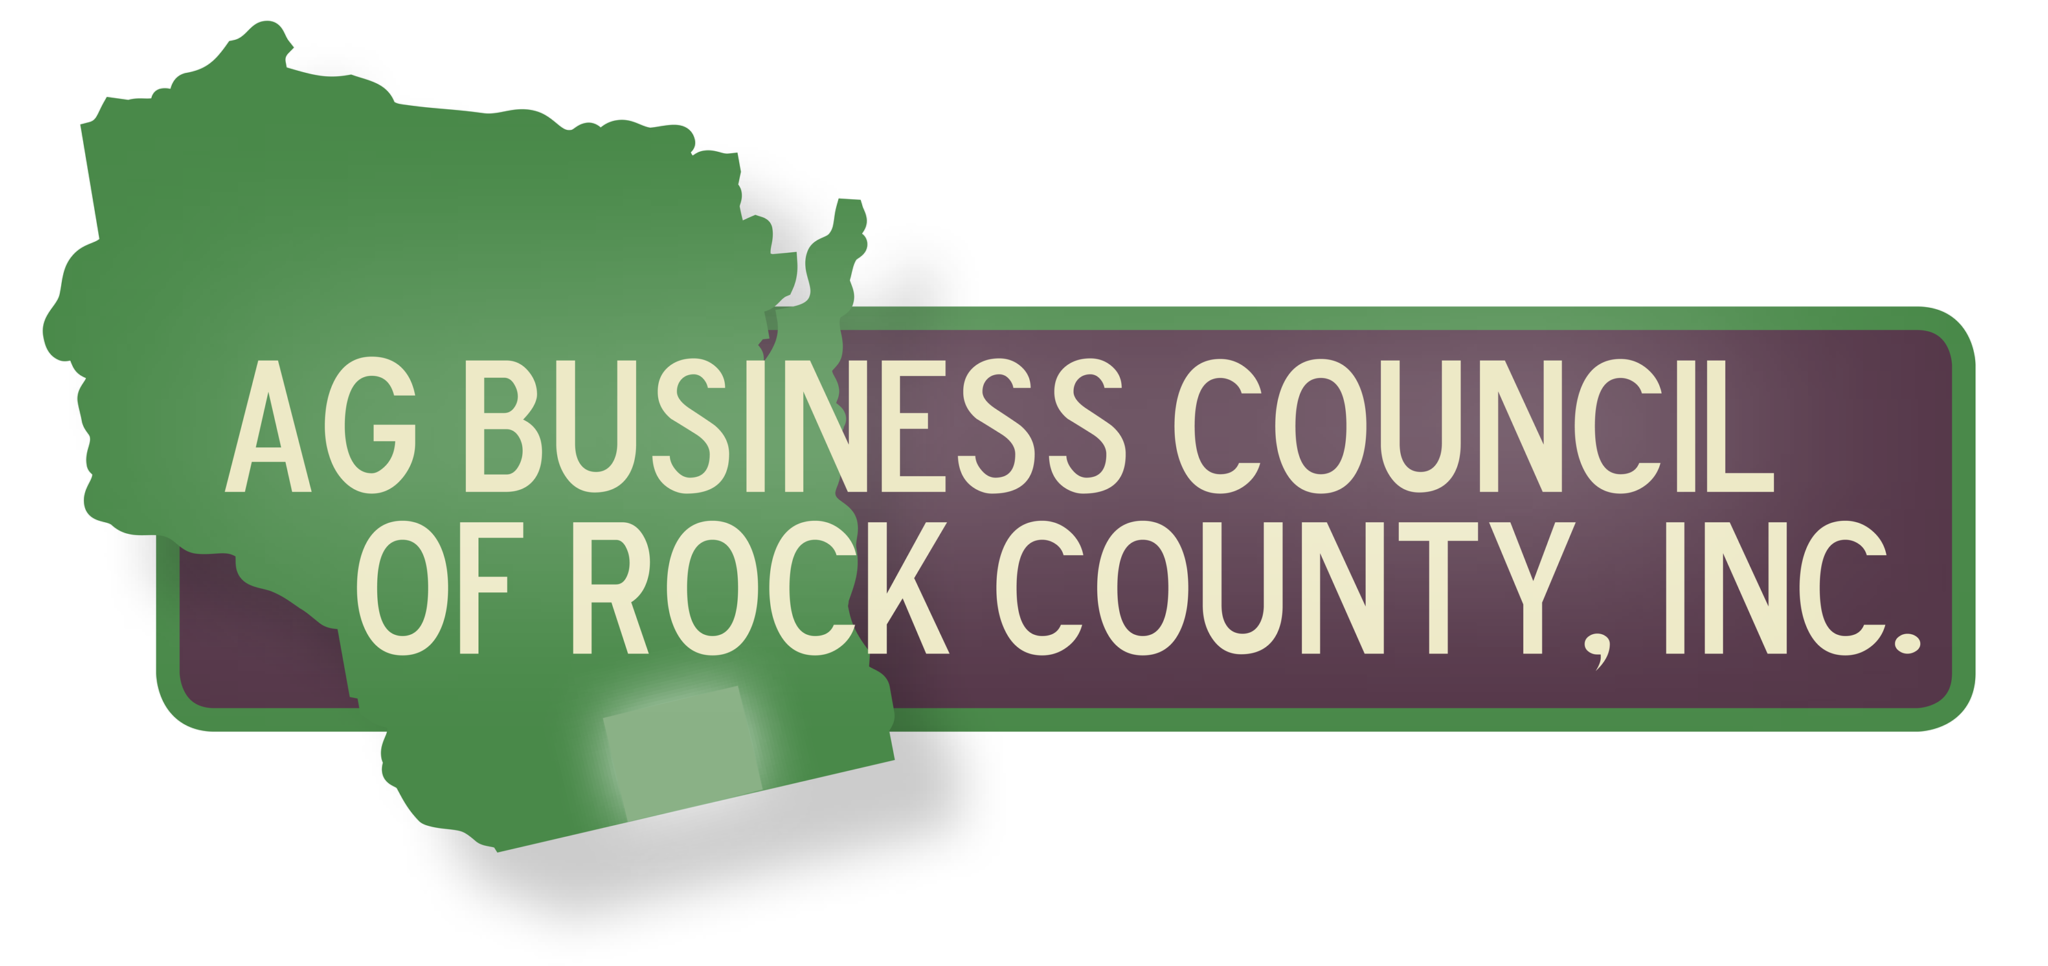 Ag Business Council of Rock County